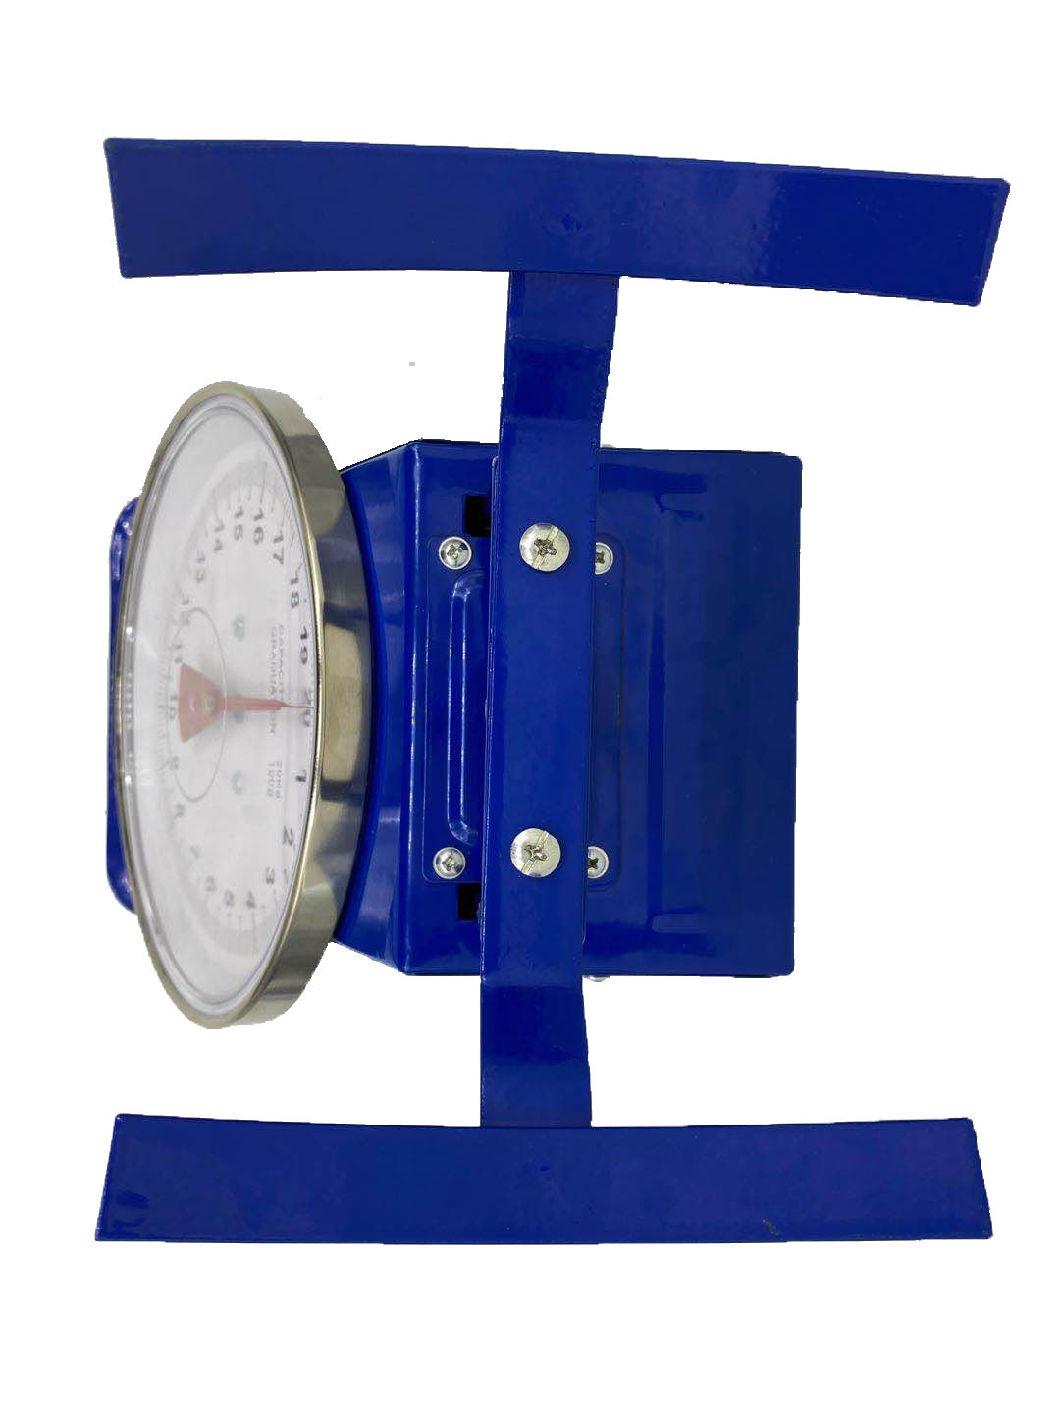 High Accuracy Iron Dial Spring Weighing Scales with Funnel